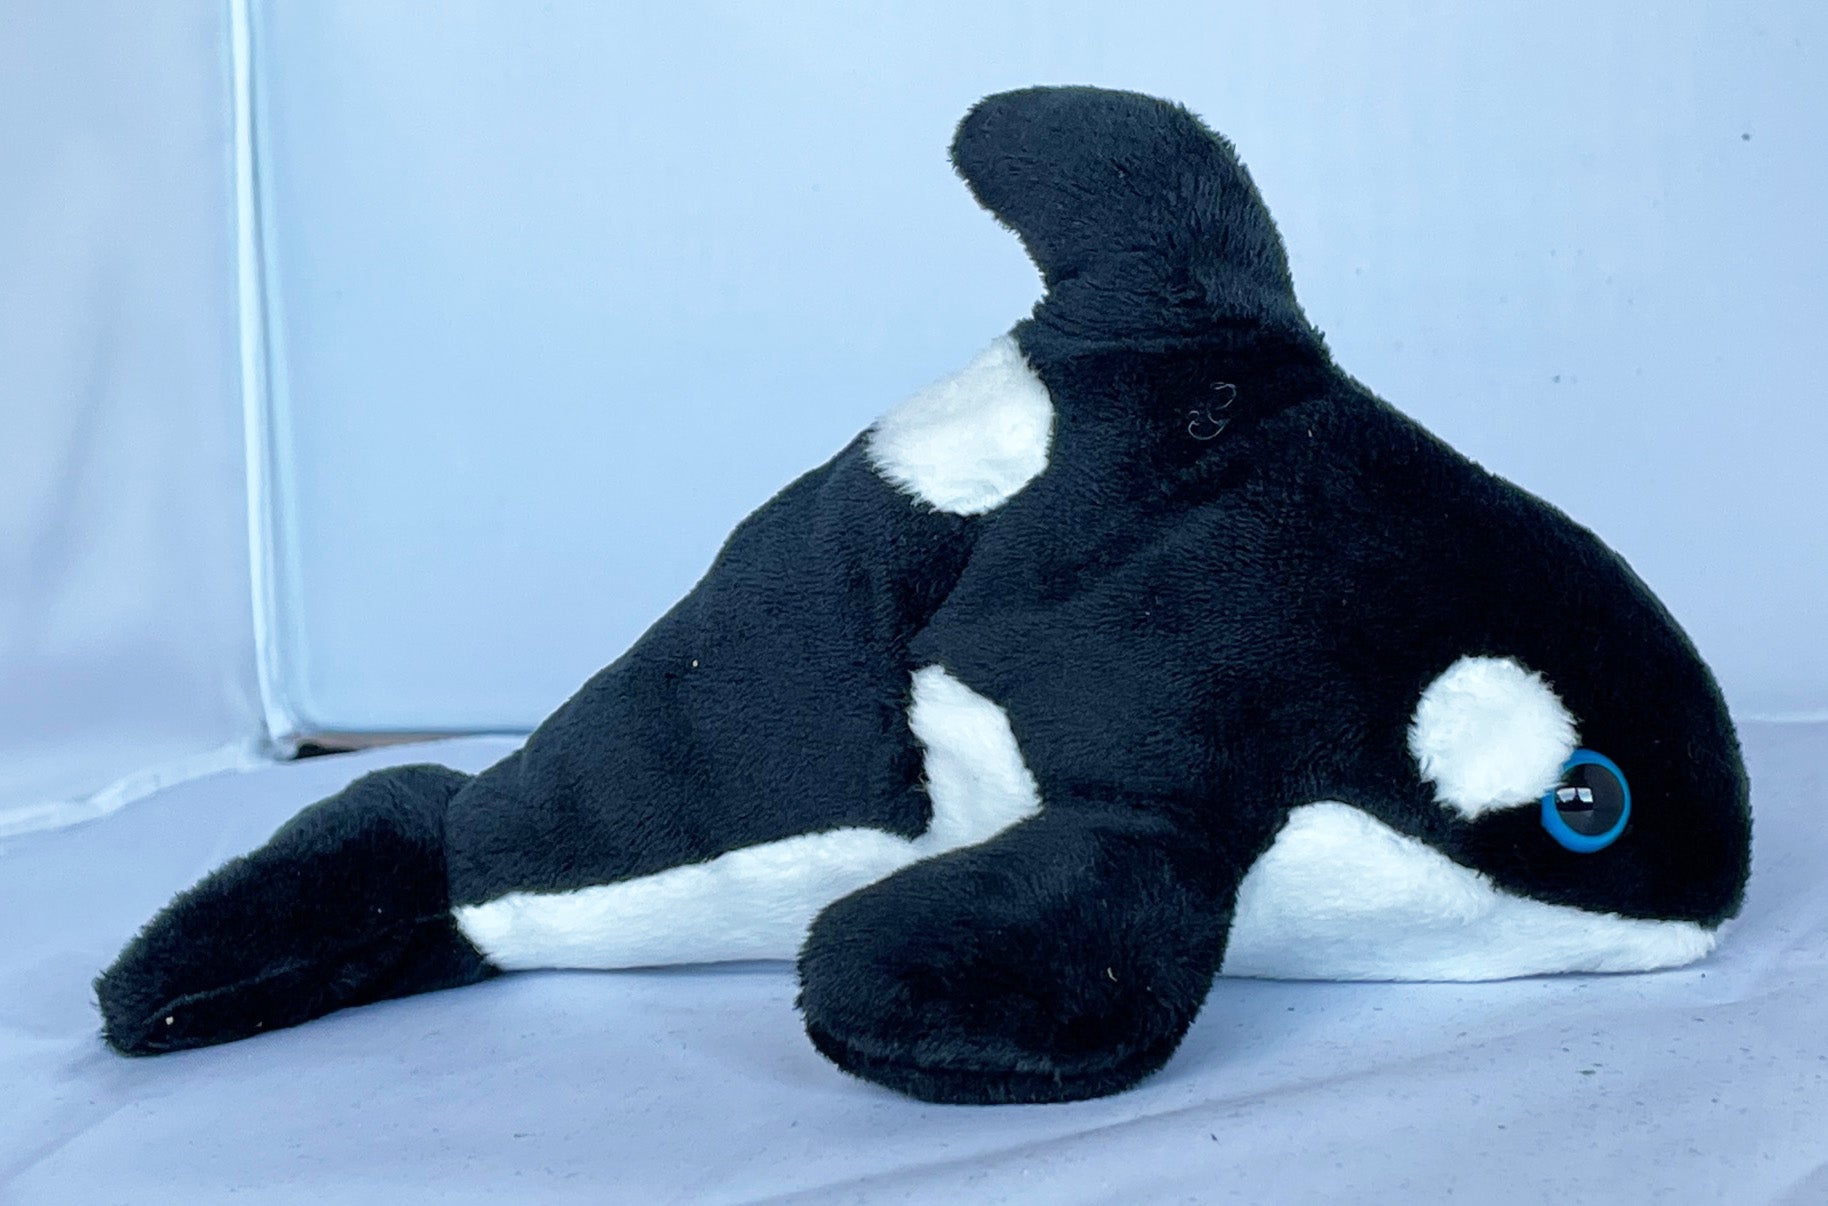 Orca Plush: Small and Soft